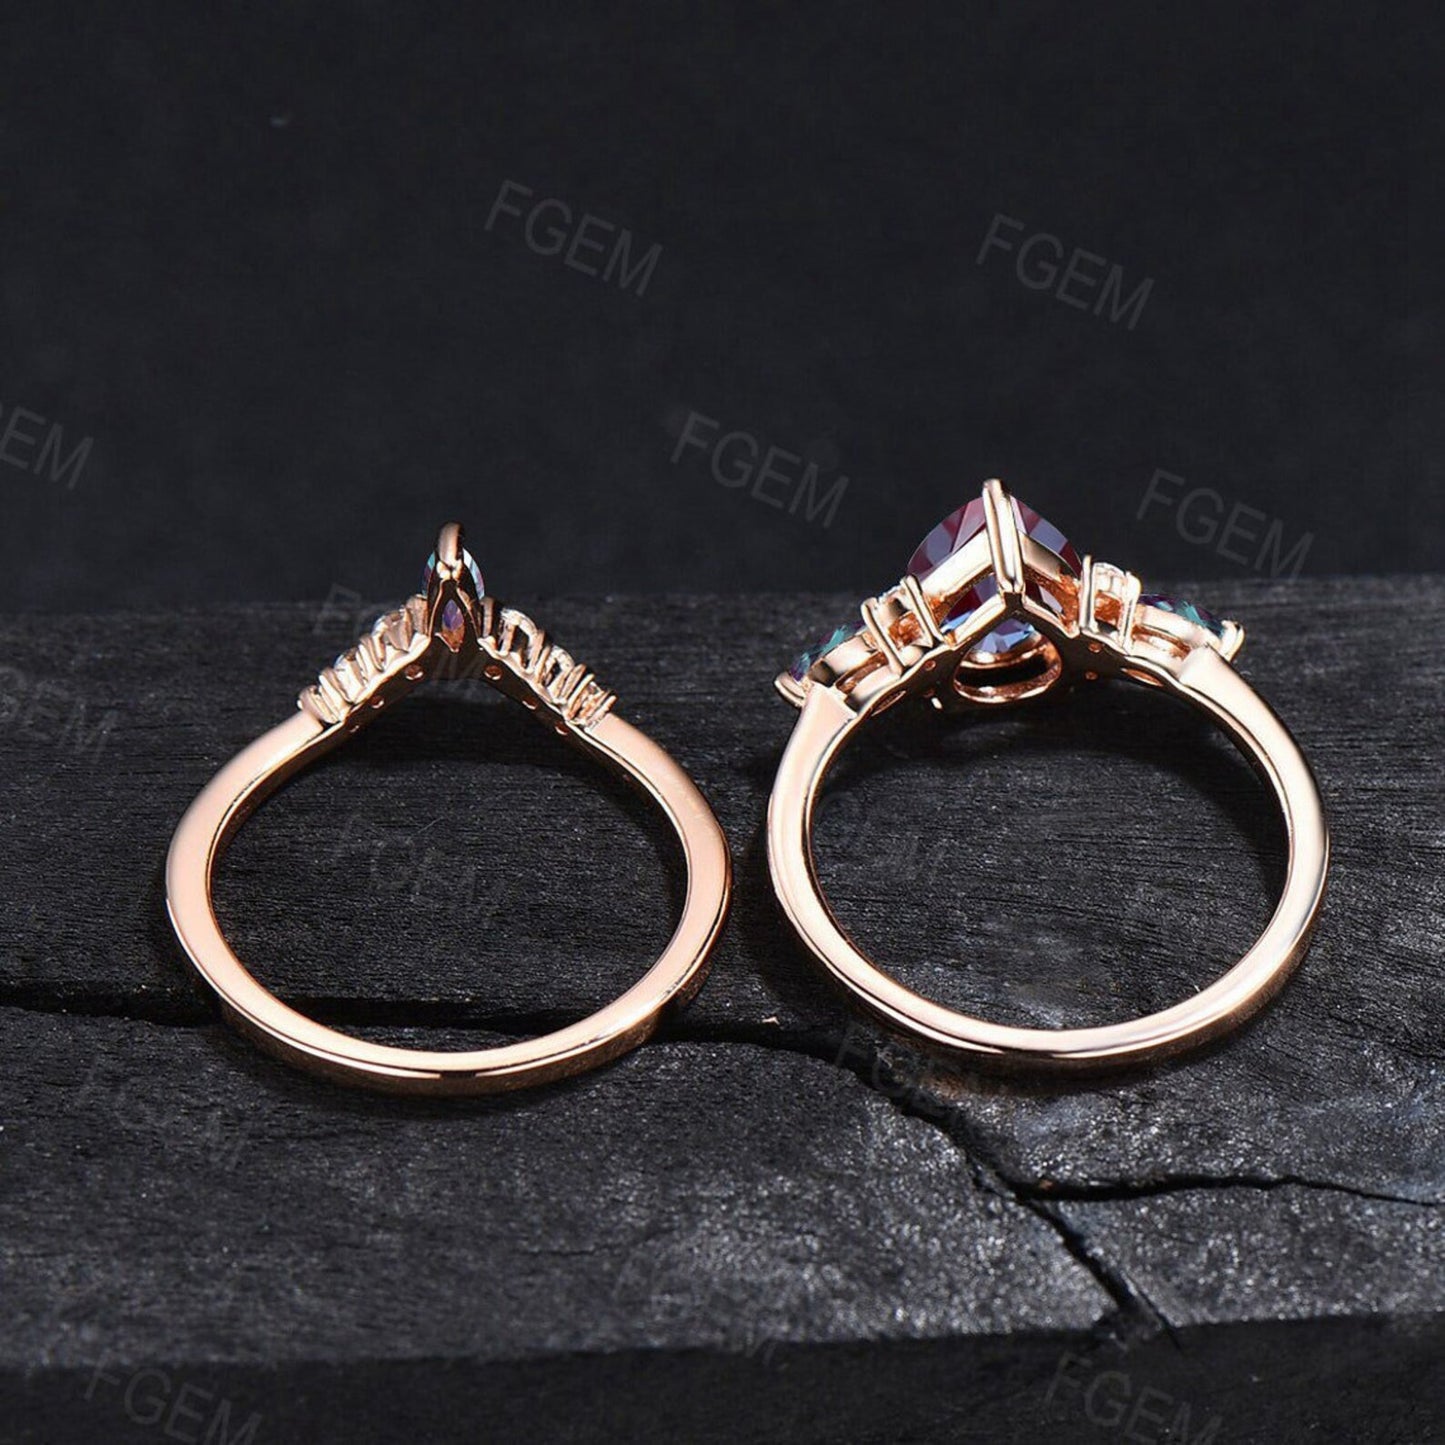 Unique Alexandrite Ring Set Rose Gold Vintage 1.25ct Pear Alexandrite Moissanite Ring Set Curve Wedding Band Personalized Anniversary Gifts